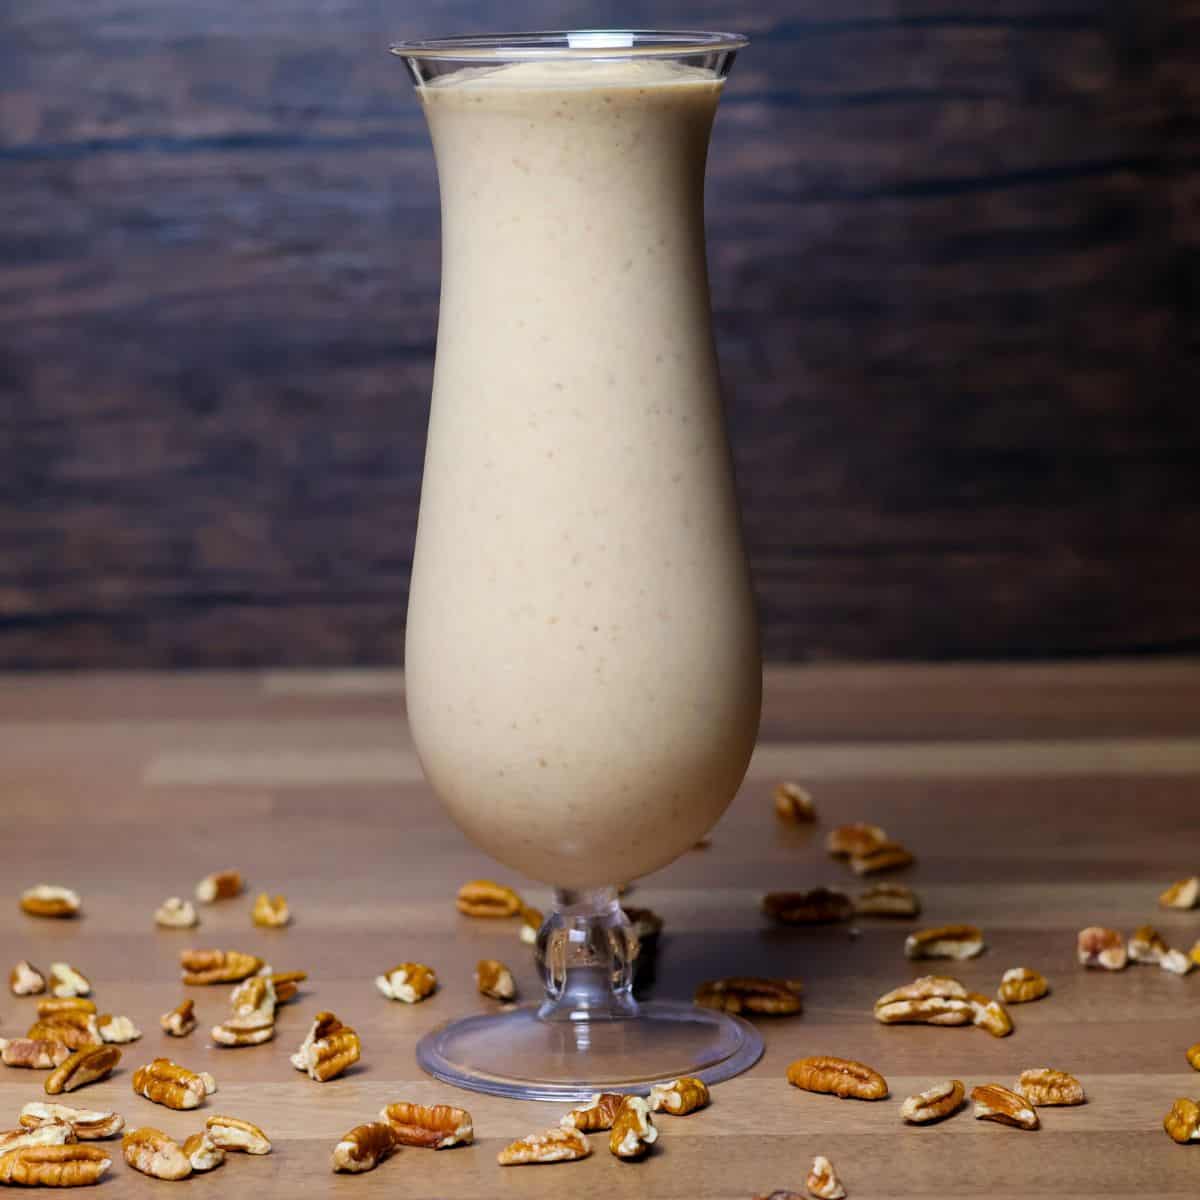 A tall glass of creamy Hulk smoothie served on a wooden table, with the surface sprinkled with crushed pecans for added texture and flavor.